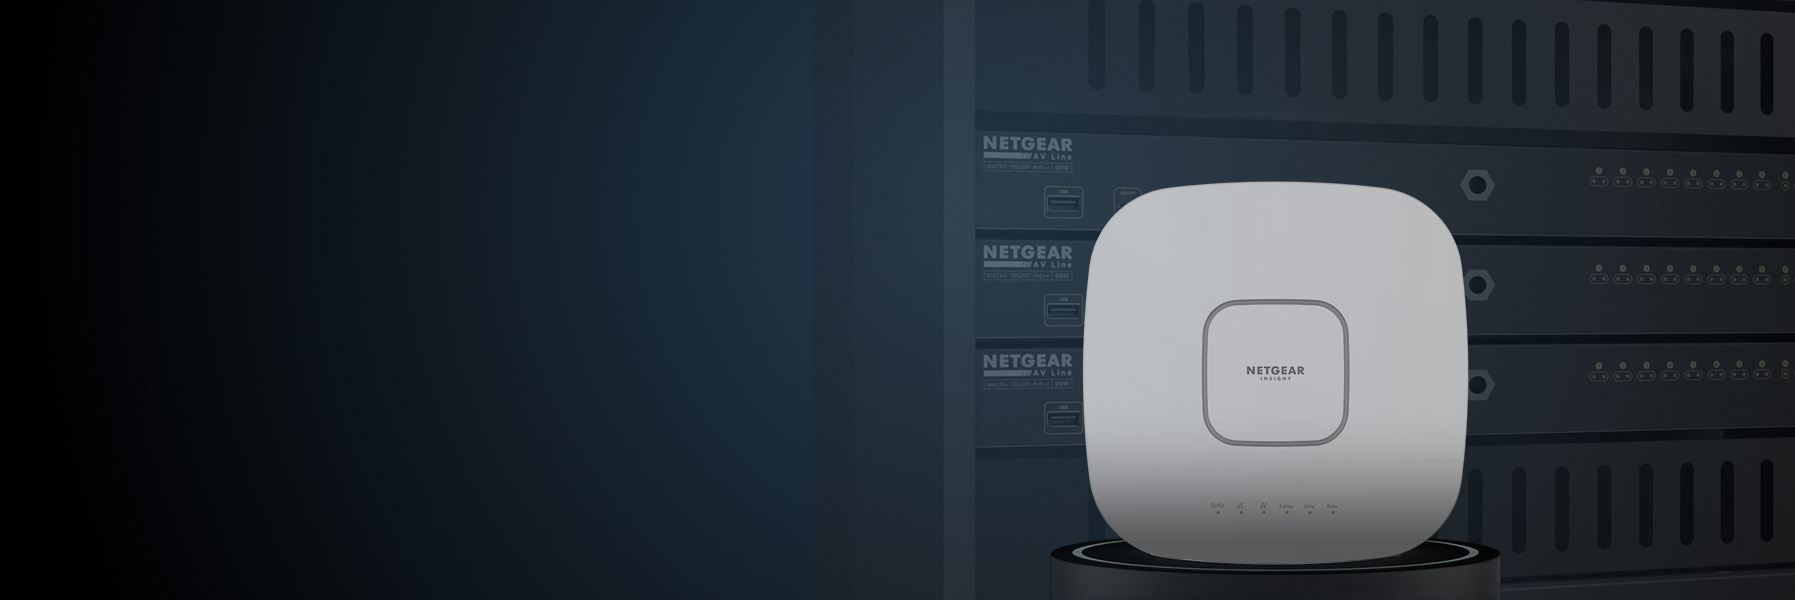 NETGEAR Introduces Top-of-the-line Cloud Manageable Smart Switch Series  Designed for 10 Gig Connectivity